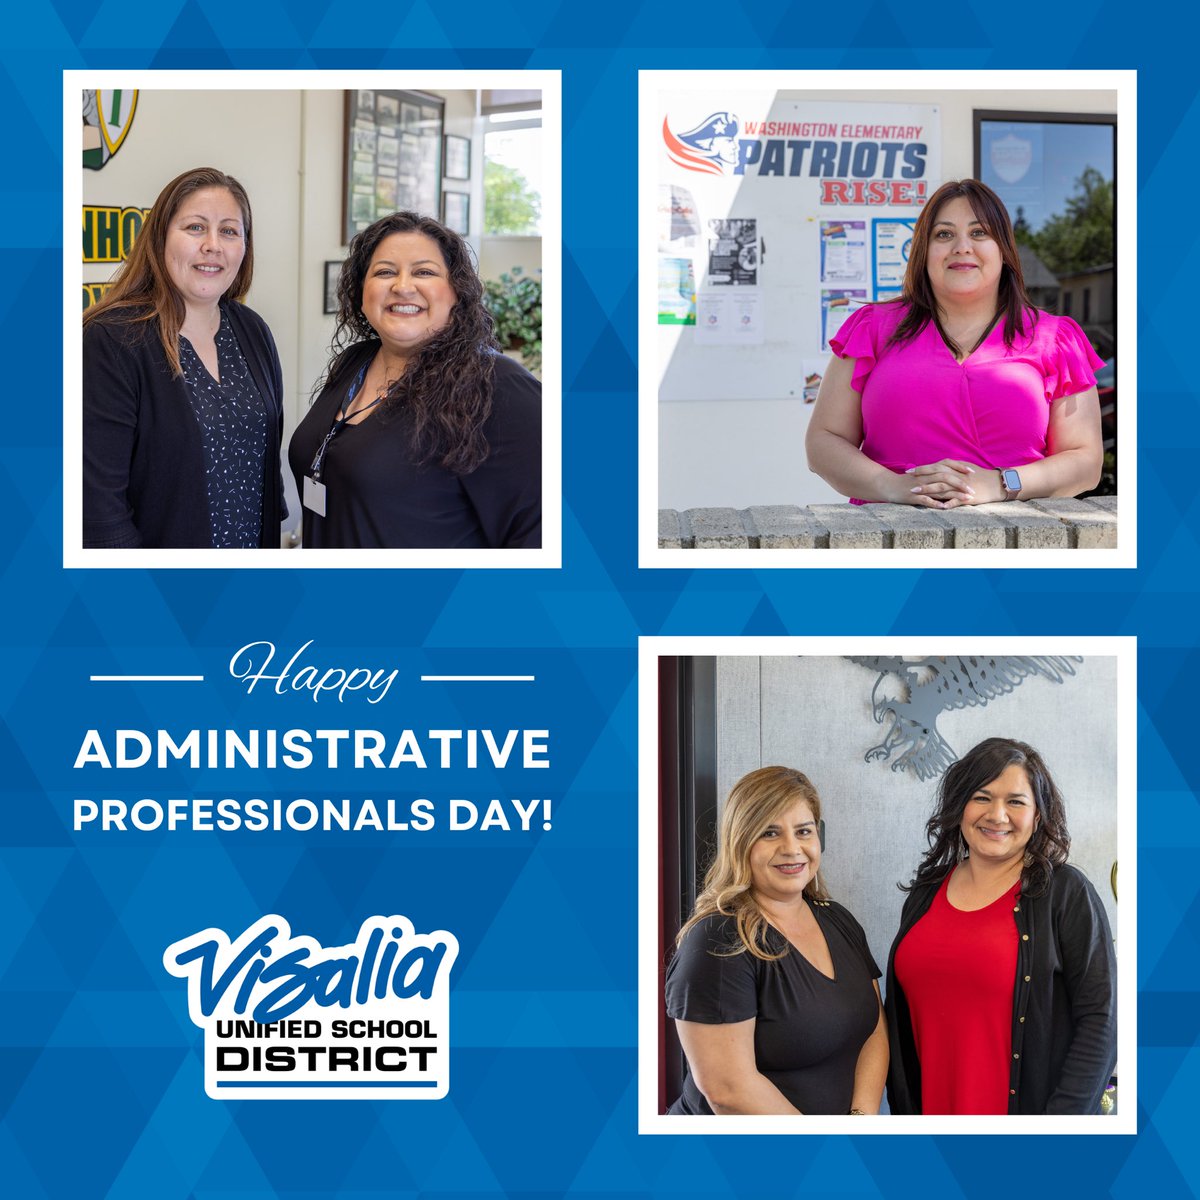 Happy Administrative Professionals Day! Your hard work and dedication keeps us on track every single day. Thank you for all you do to support our students, teachers, and staff! #IamVUSD